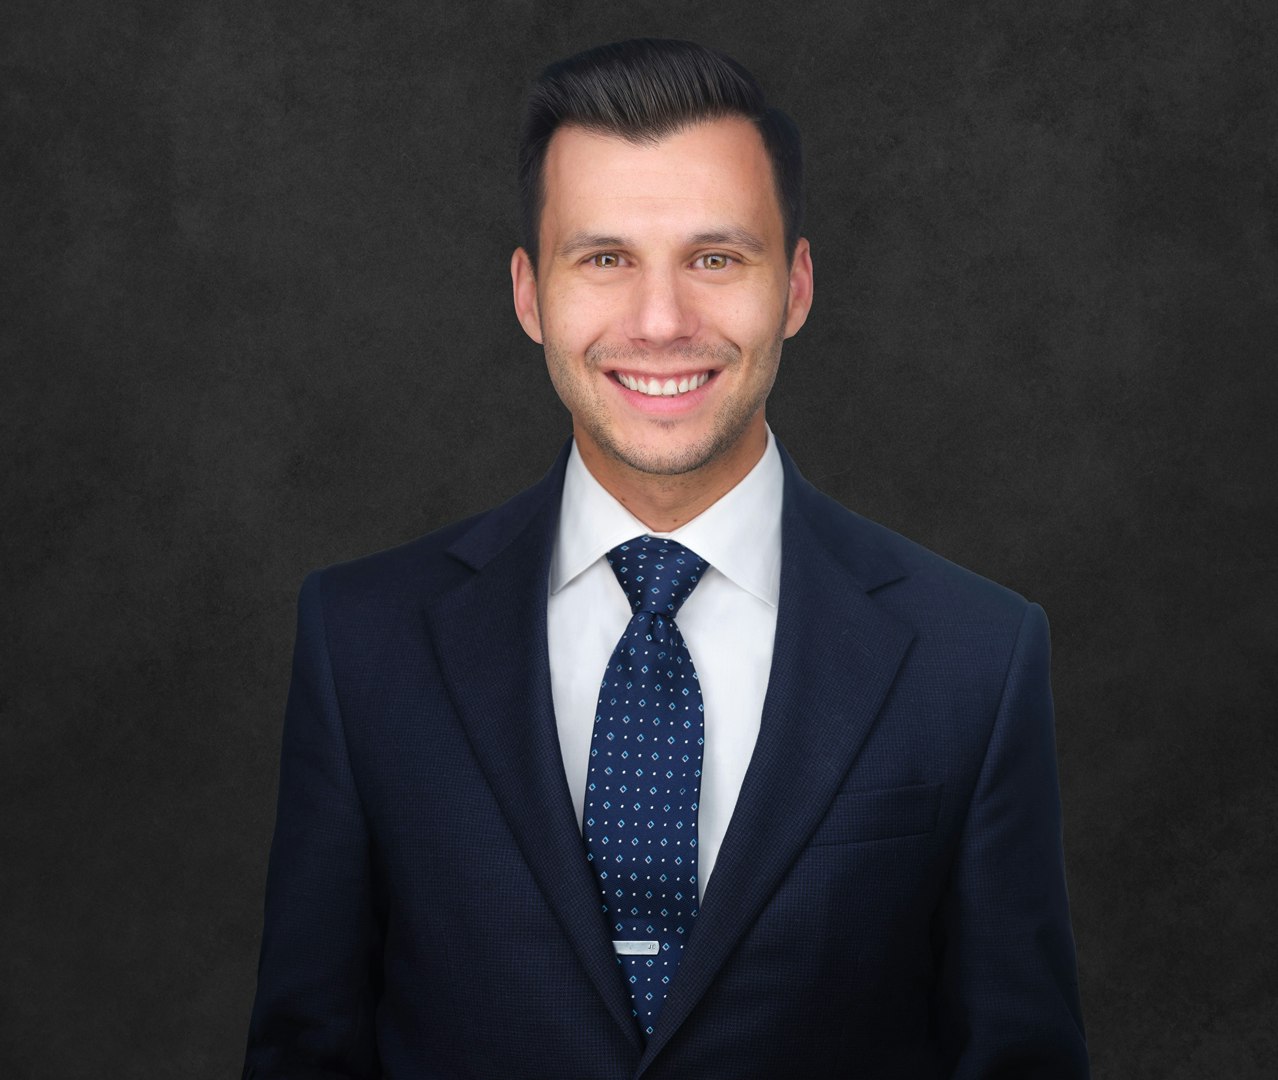 Photo of Jon Ebel smiling in suit, shirt and tie